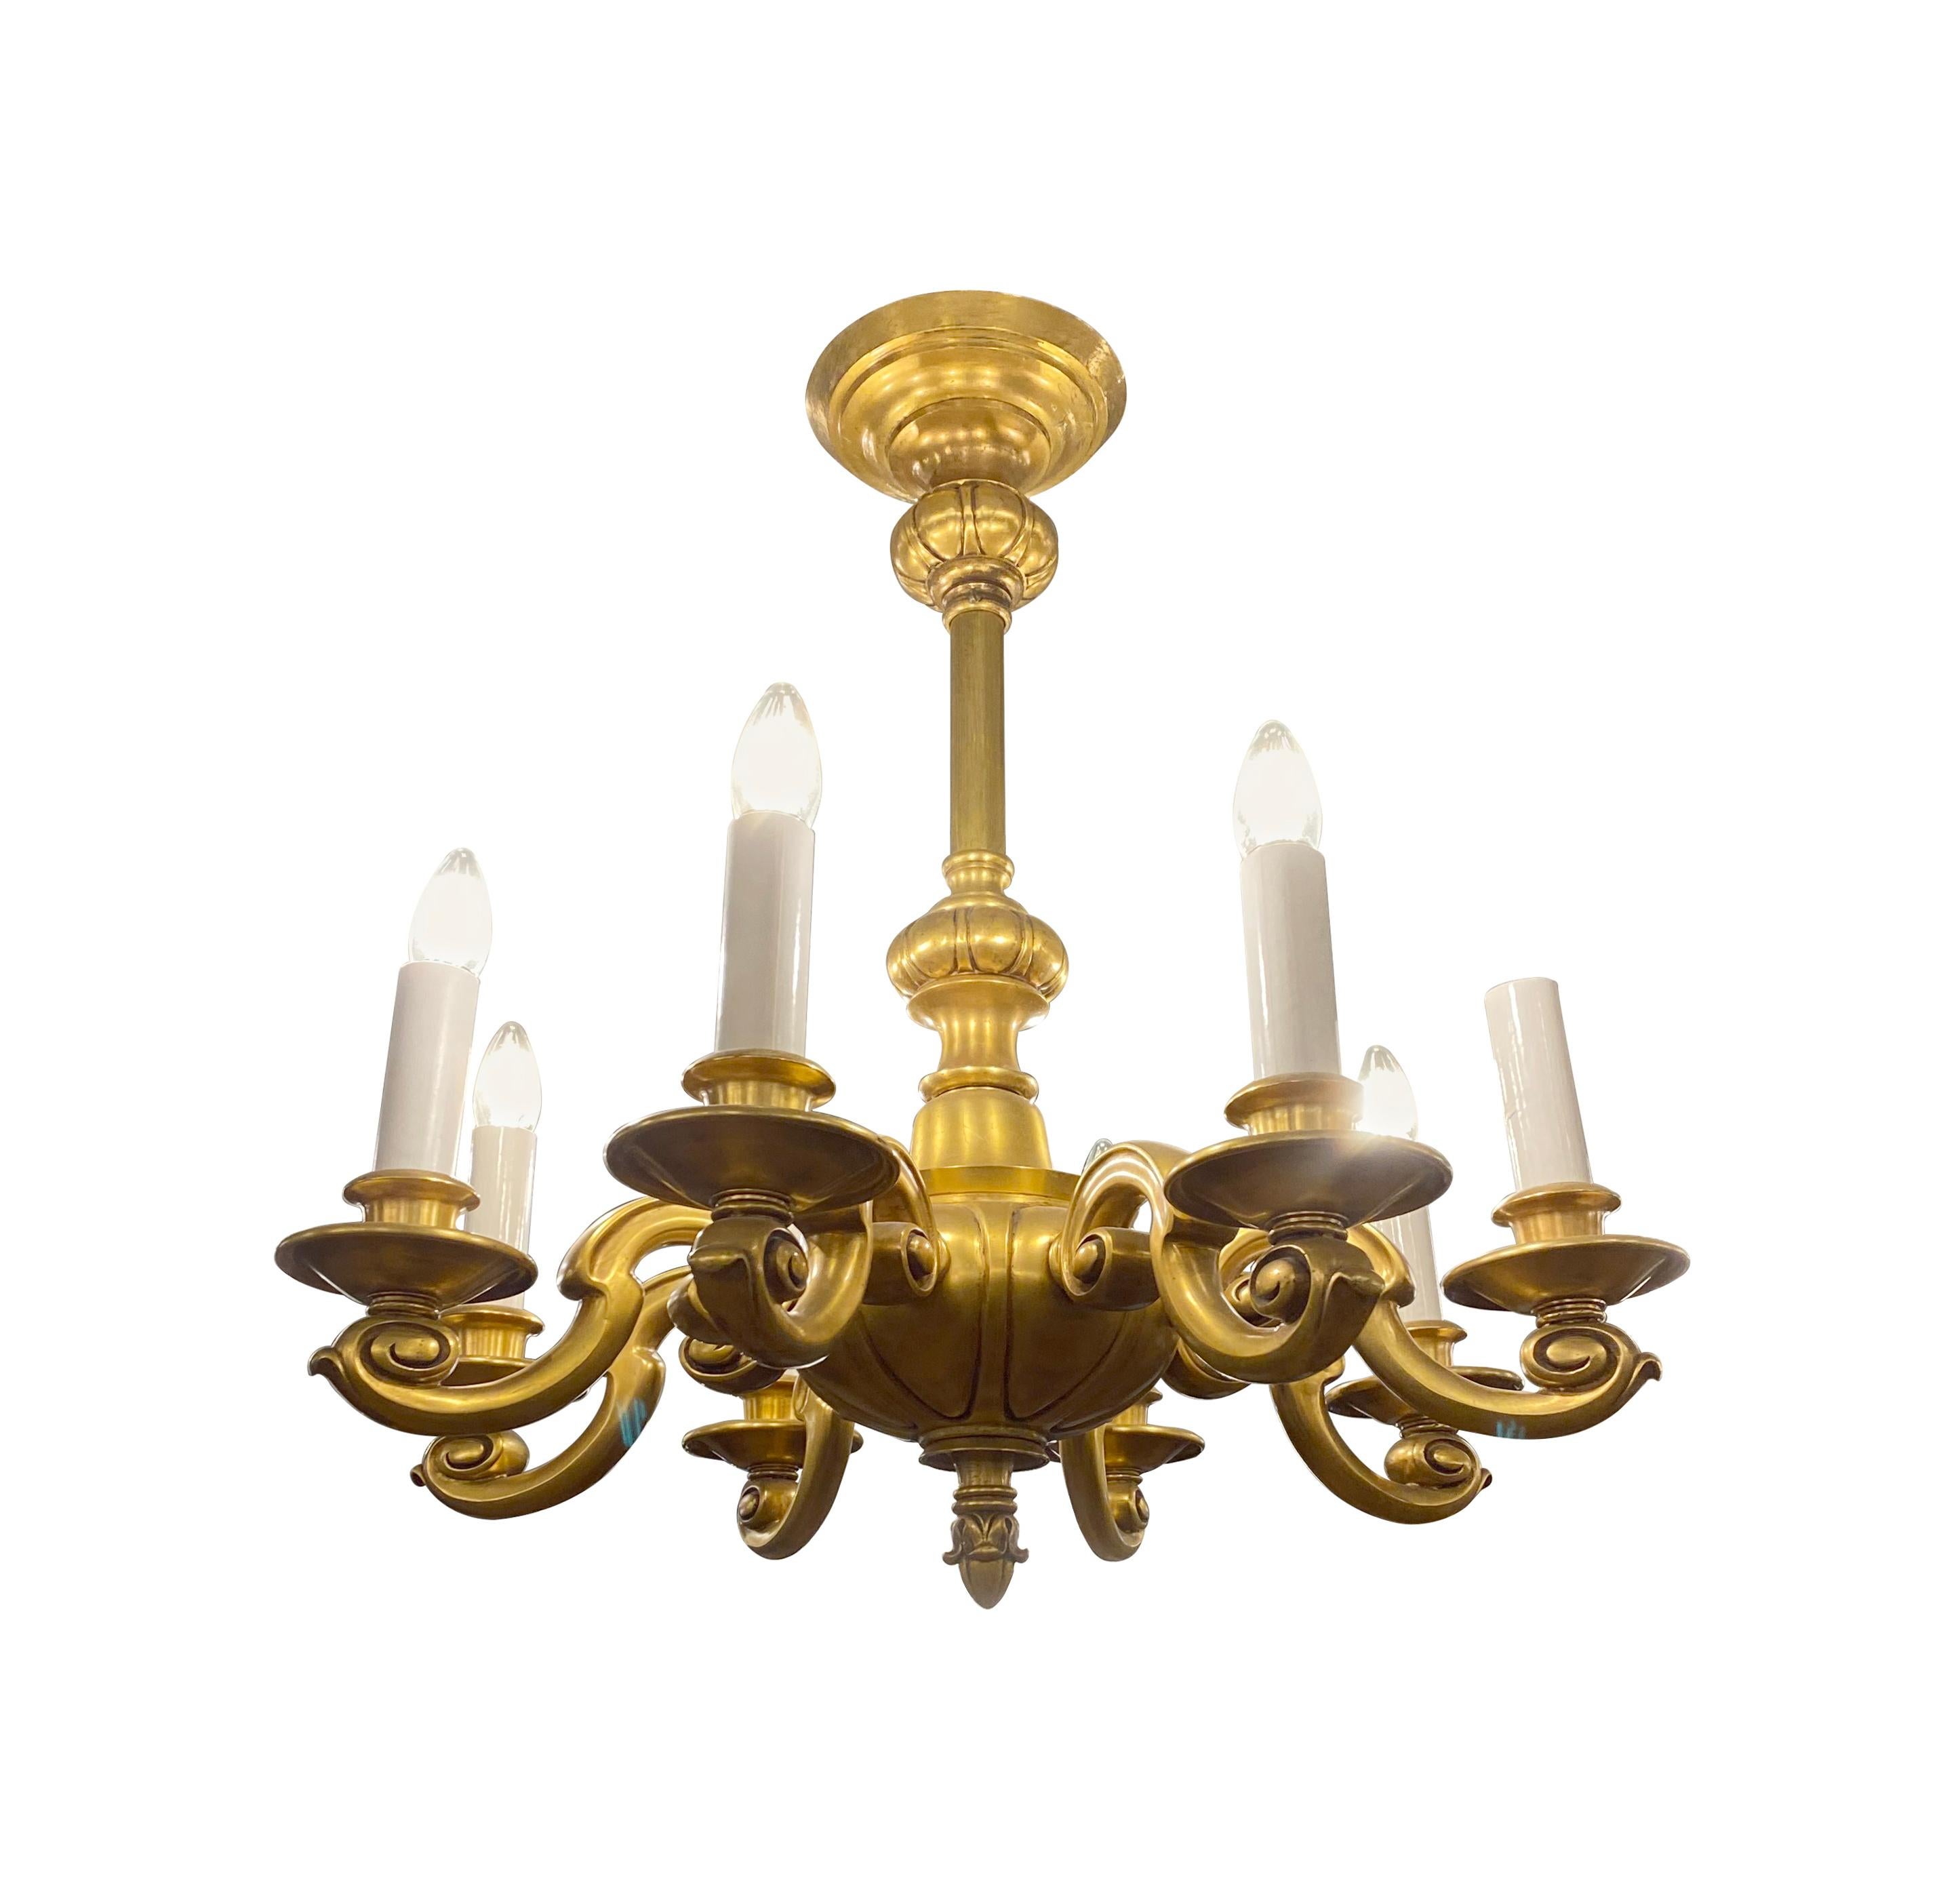 20th Century gilded bronze chandelier designed in a Georgian style with eight arms and an ornate acorn finial. Cleaned and rewired. Takes eight standard household medium base lightbulbs. Please note, this item is located in one of our NYC locations.